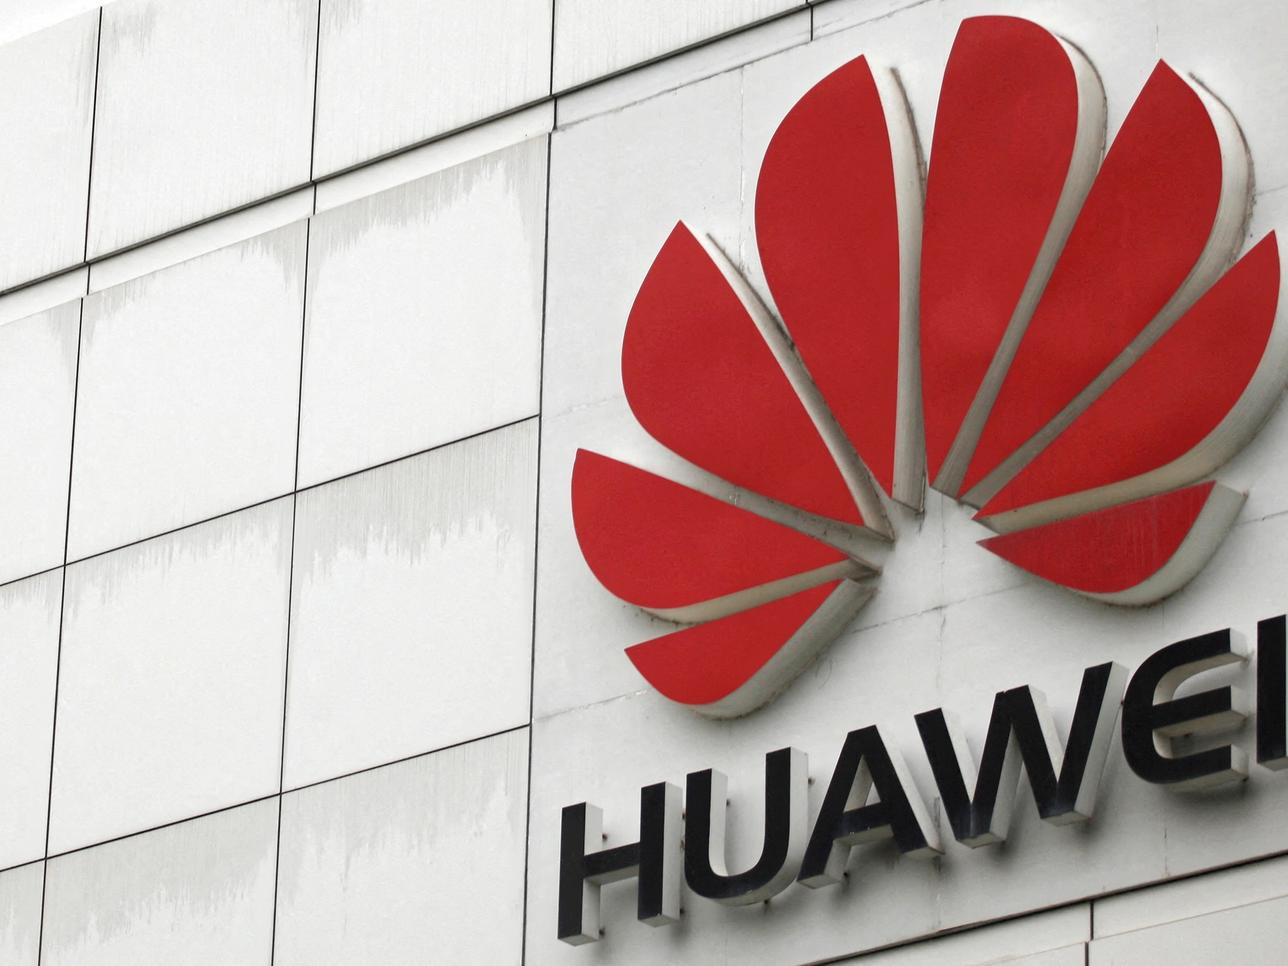 The logo of the Huawei Technologies Co. Ltd. is seen outside its headquarters in Shenzhen, Guangdong province, April 17, 2012. REUTERS/Tyrone Siu/File Photo